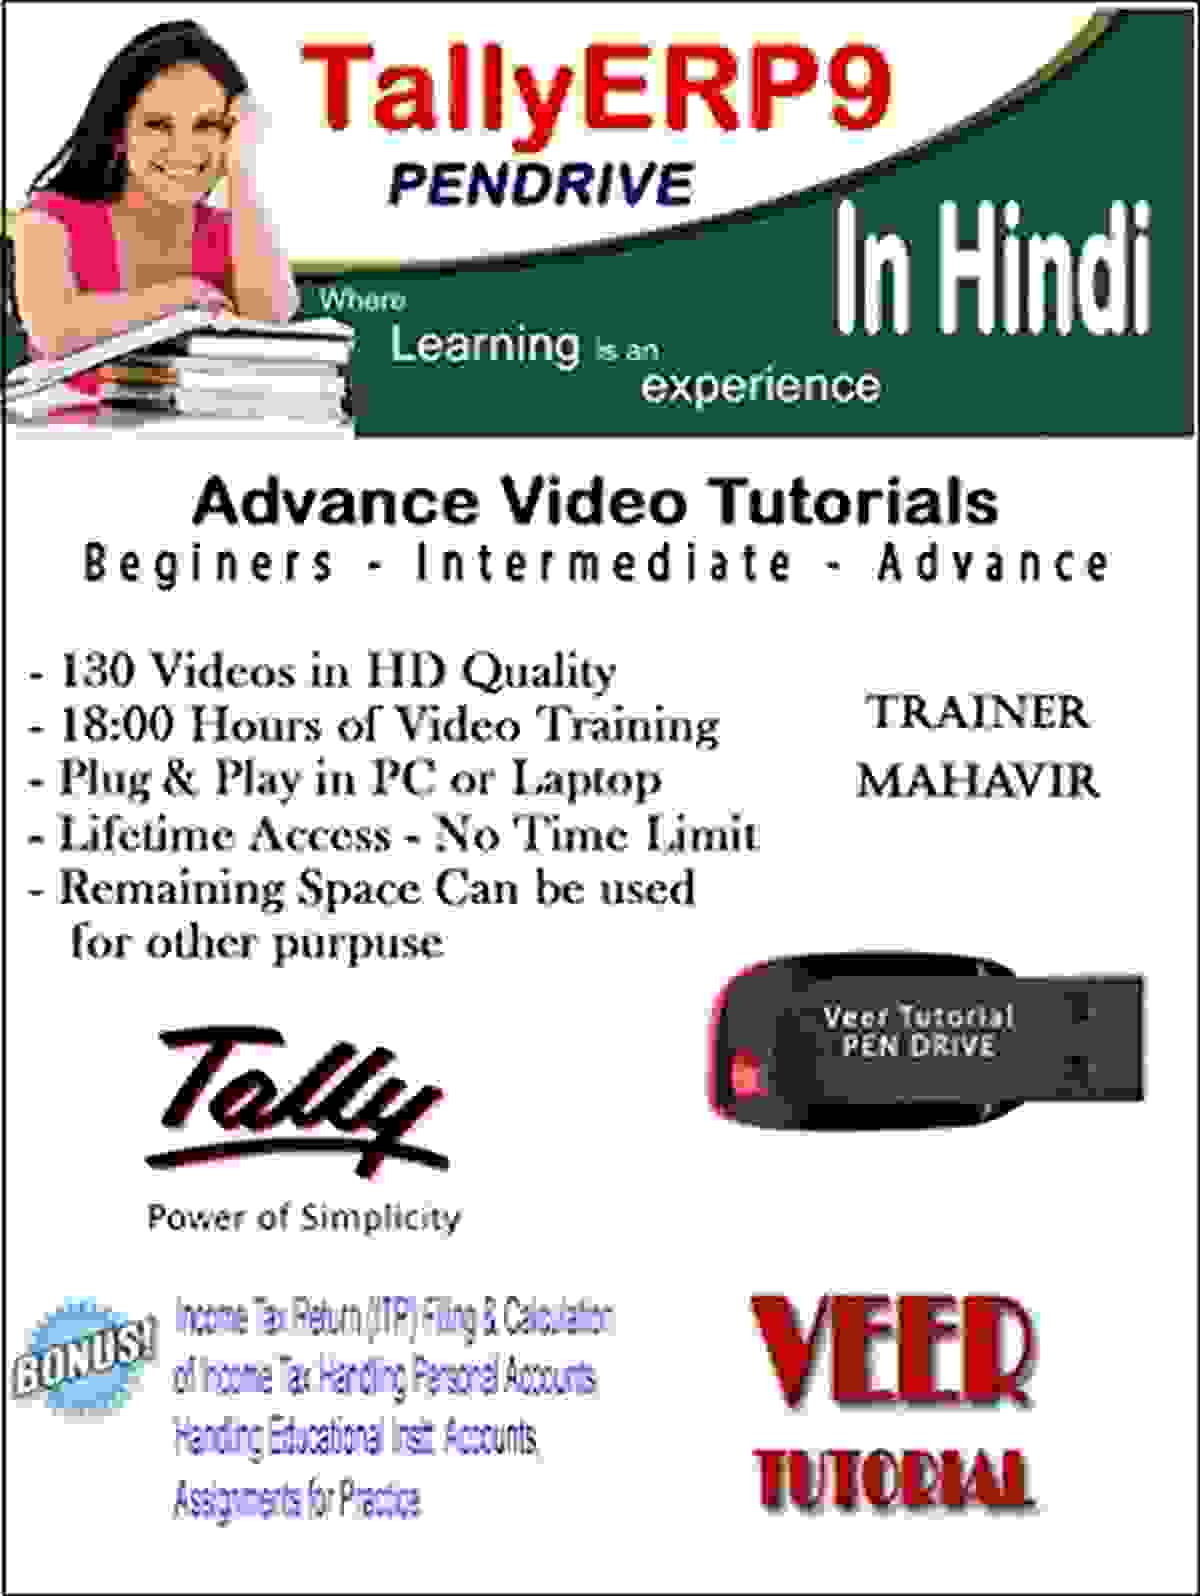 TallyERP9 Learning Tutorial Latest Version Basic to Advance Course (1 Pendrive, 130 HD Videos, 19 Hrs) Training in Hindi Video